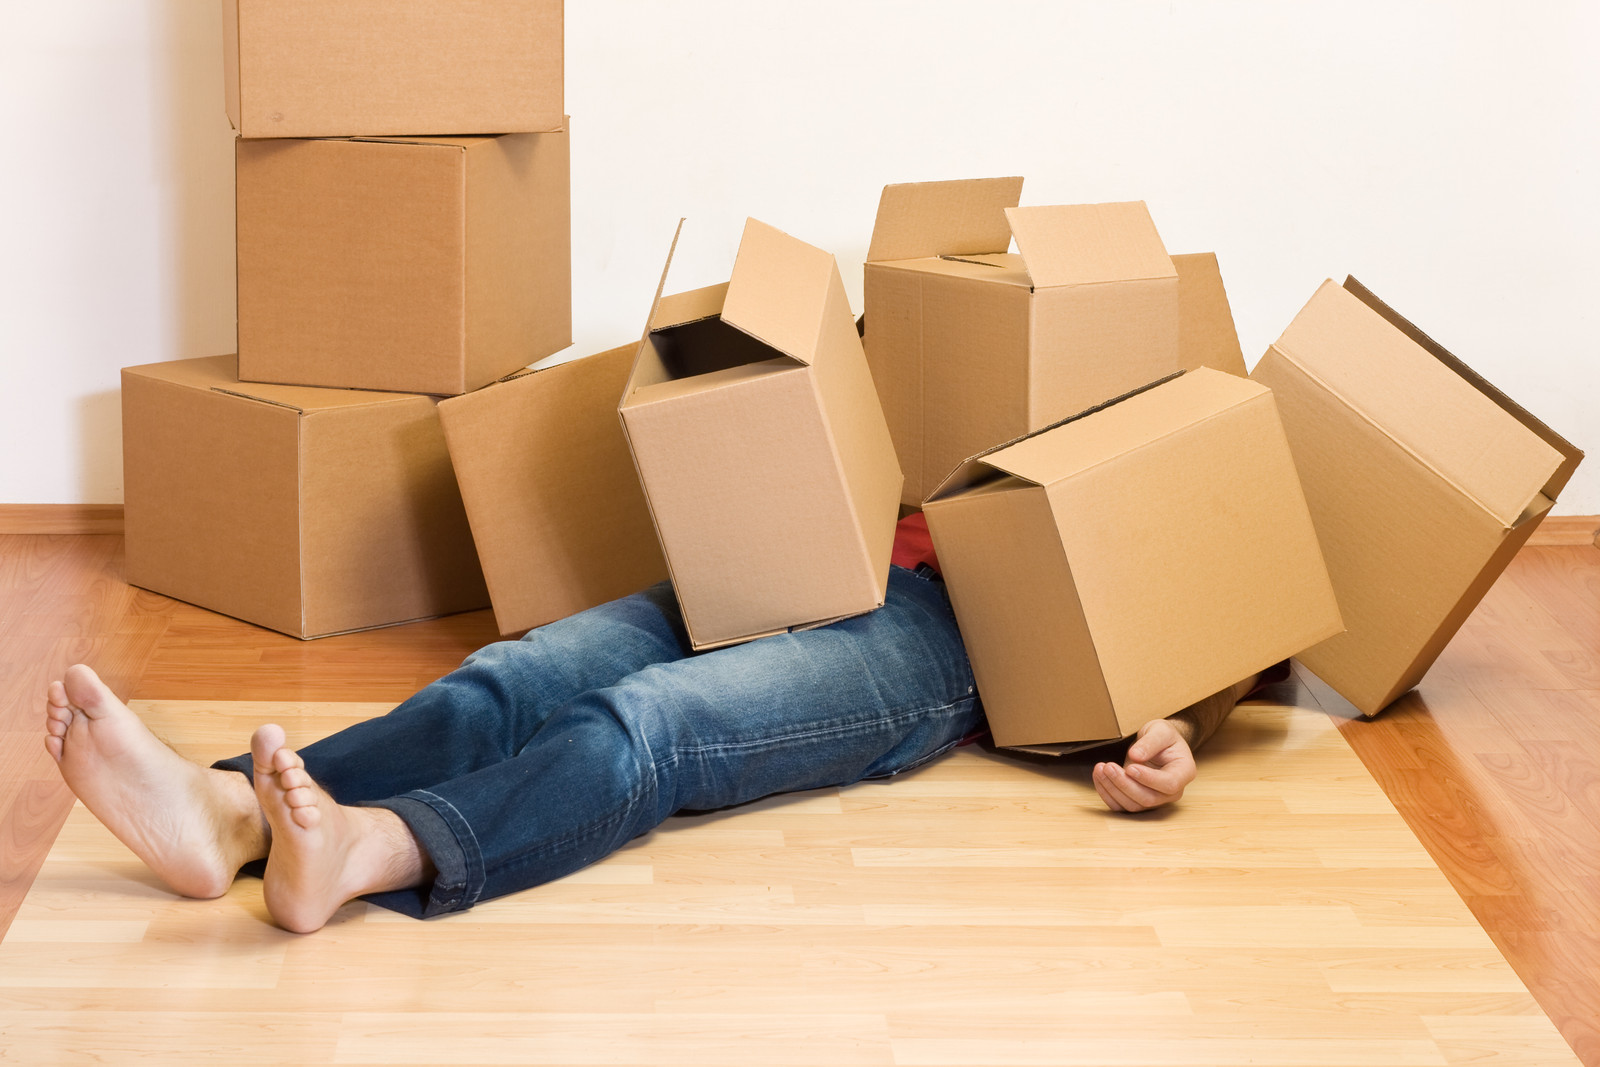 How to Make Moving Less Stressful